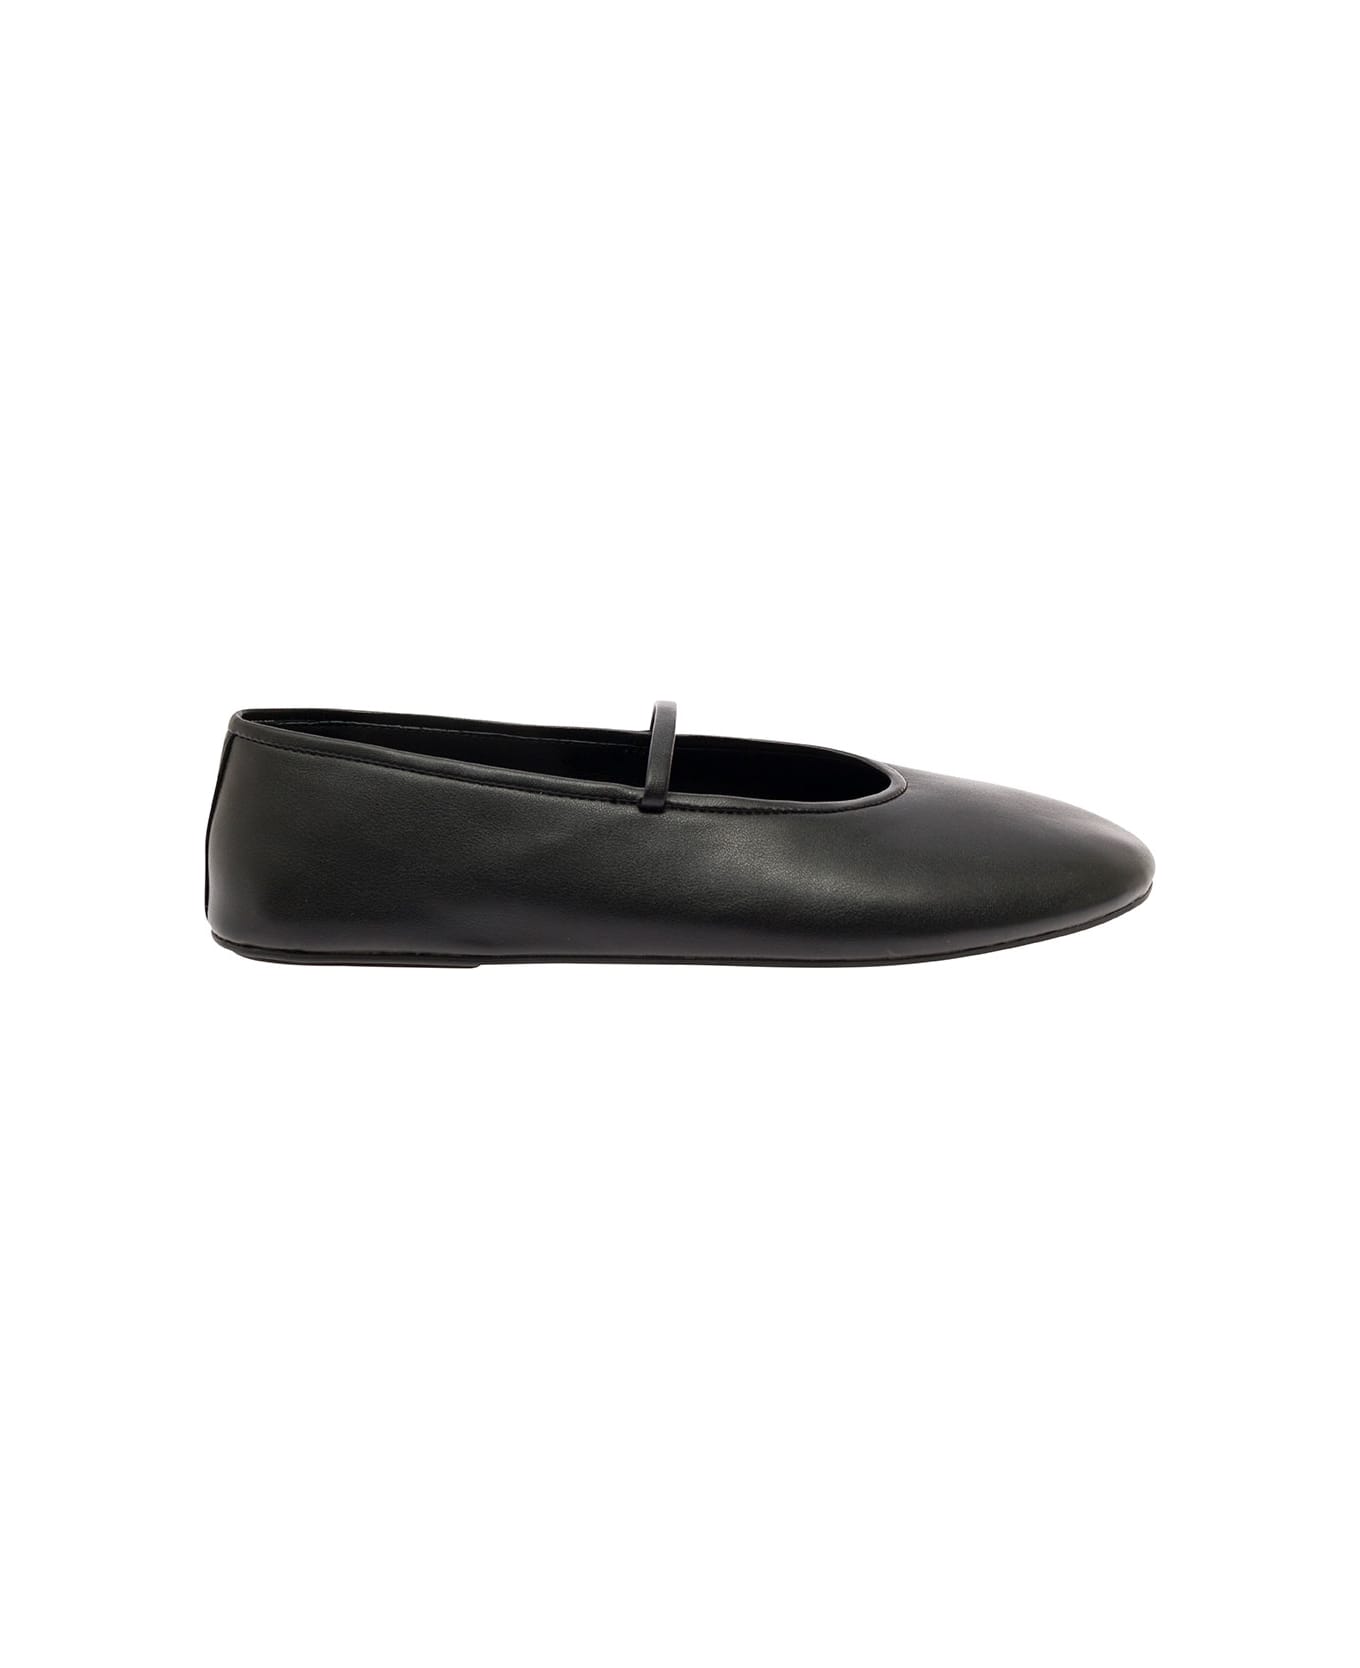 Jeffrey Campbell Black Ballet Flats With Almond Toe In Eco Leather Woman - Black フラットシューズ